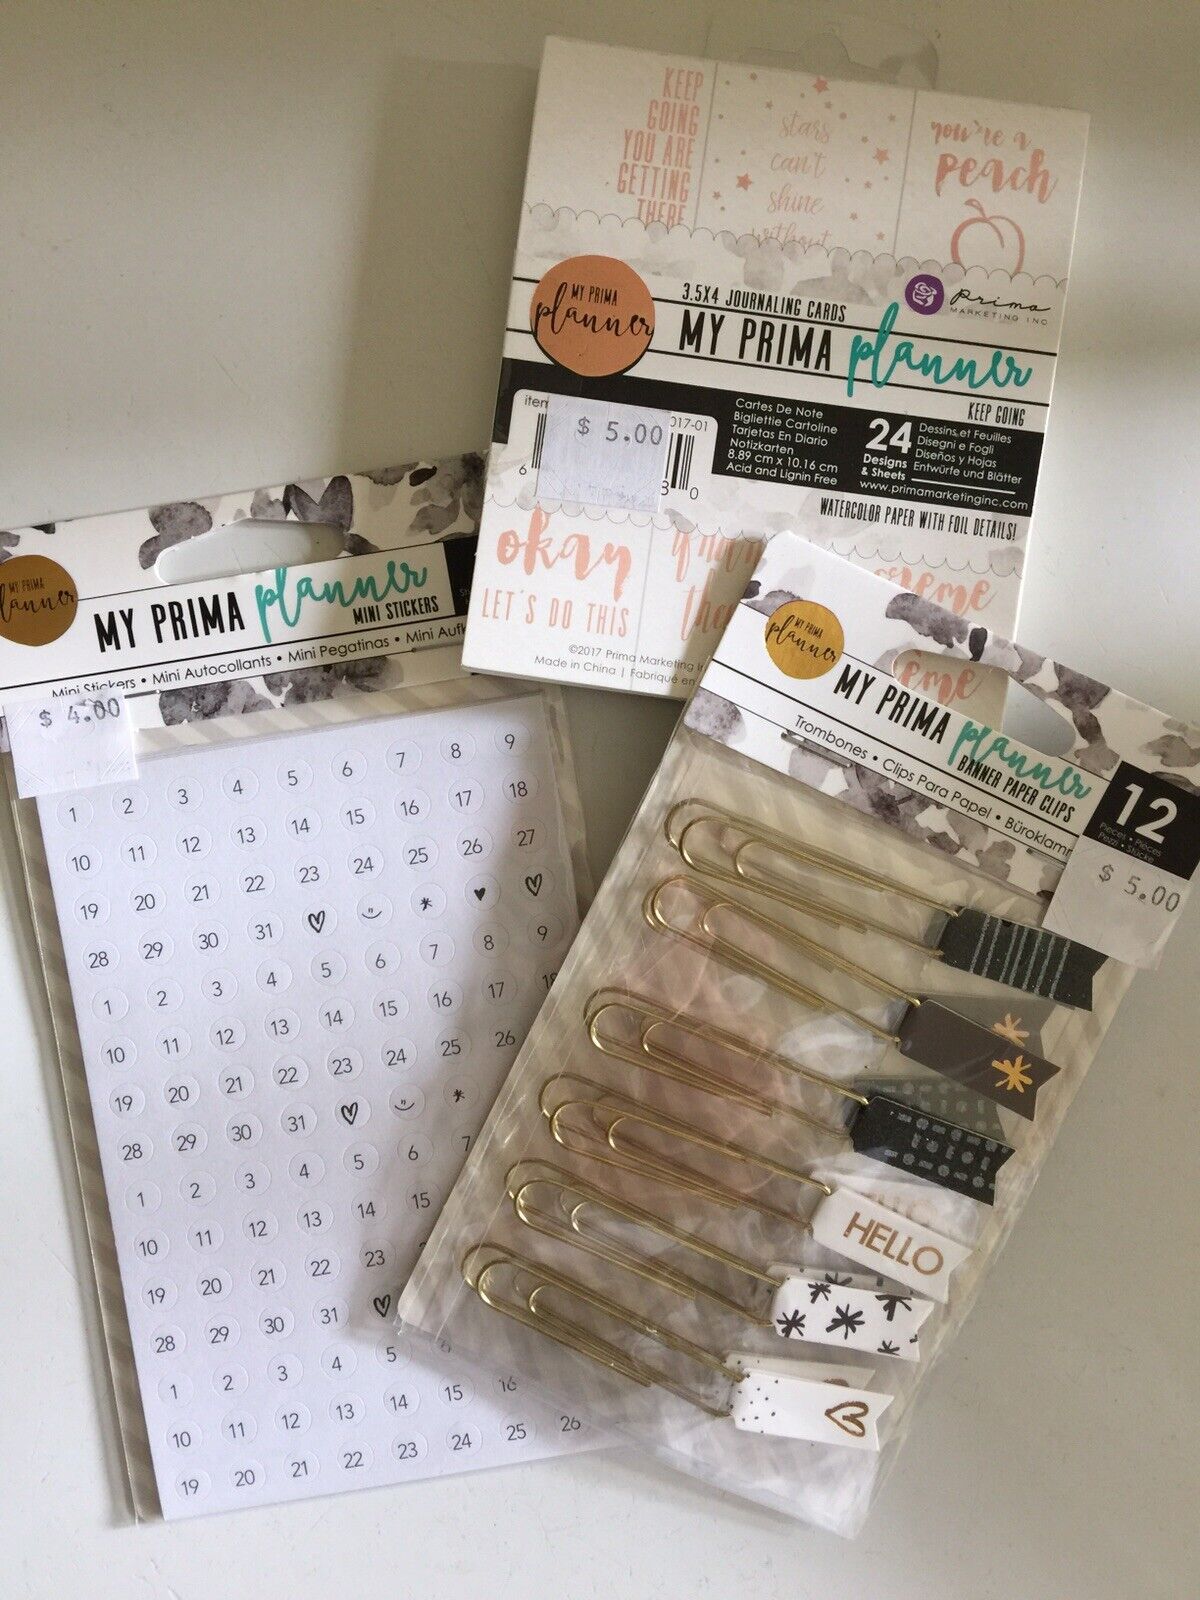 PRIMA MARKETING-MY PRIMA PLANNER BANNER PAPER CLIPS,MINI STICKERS,JOURNAL CARDS!